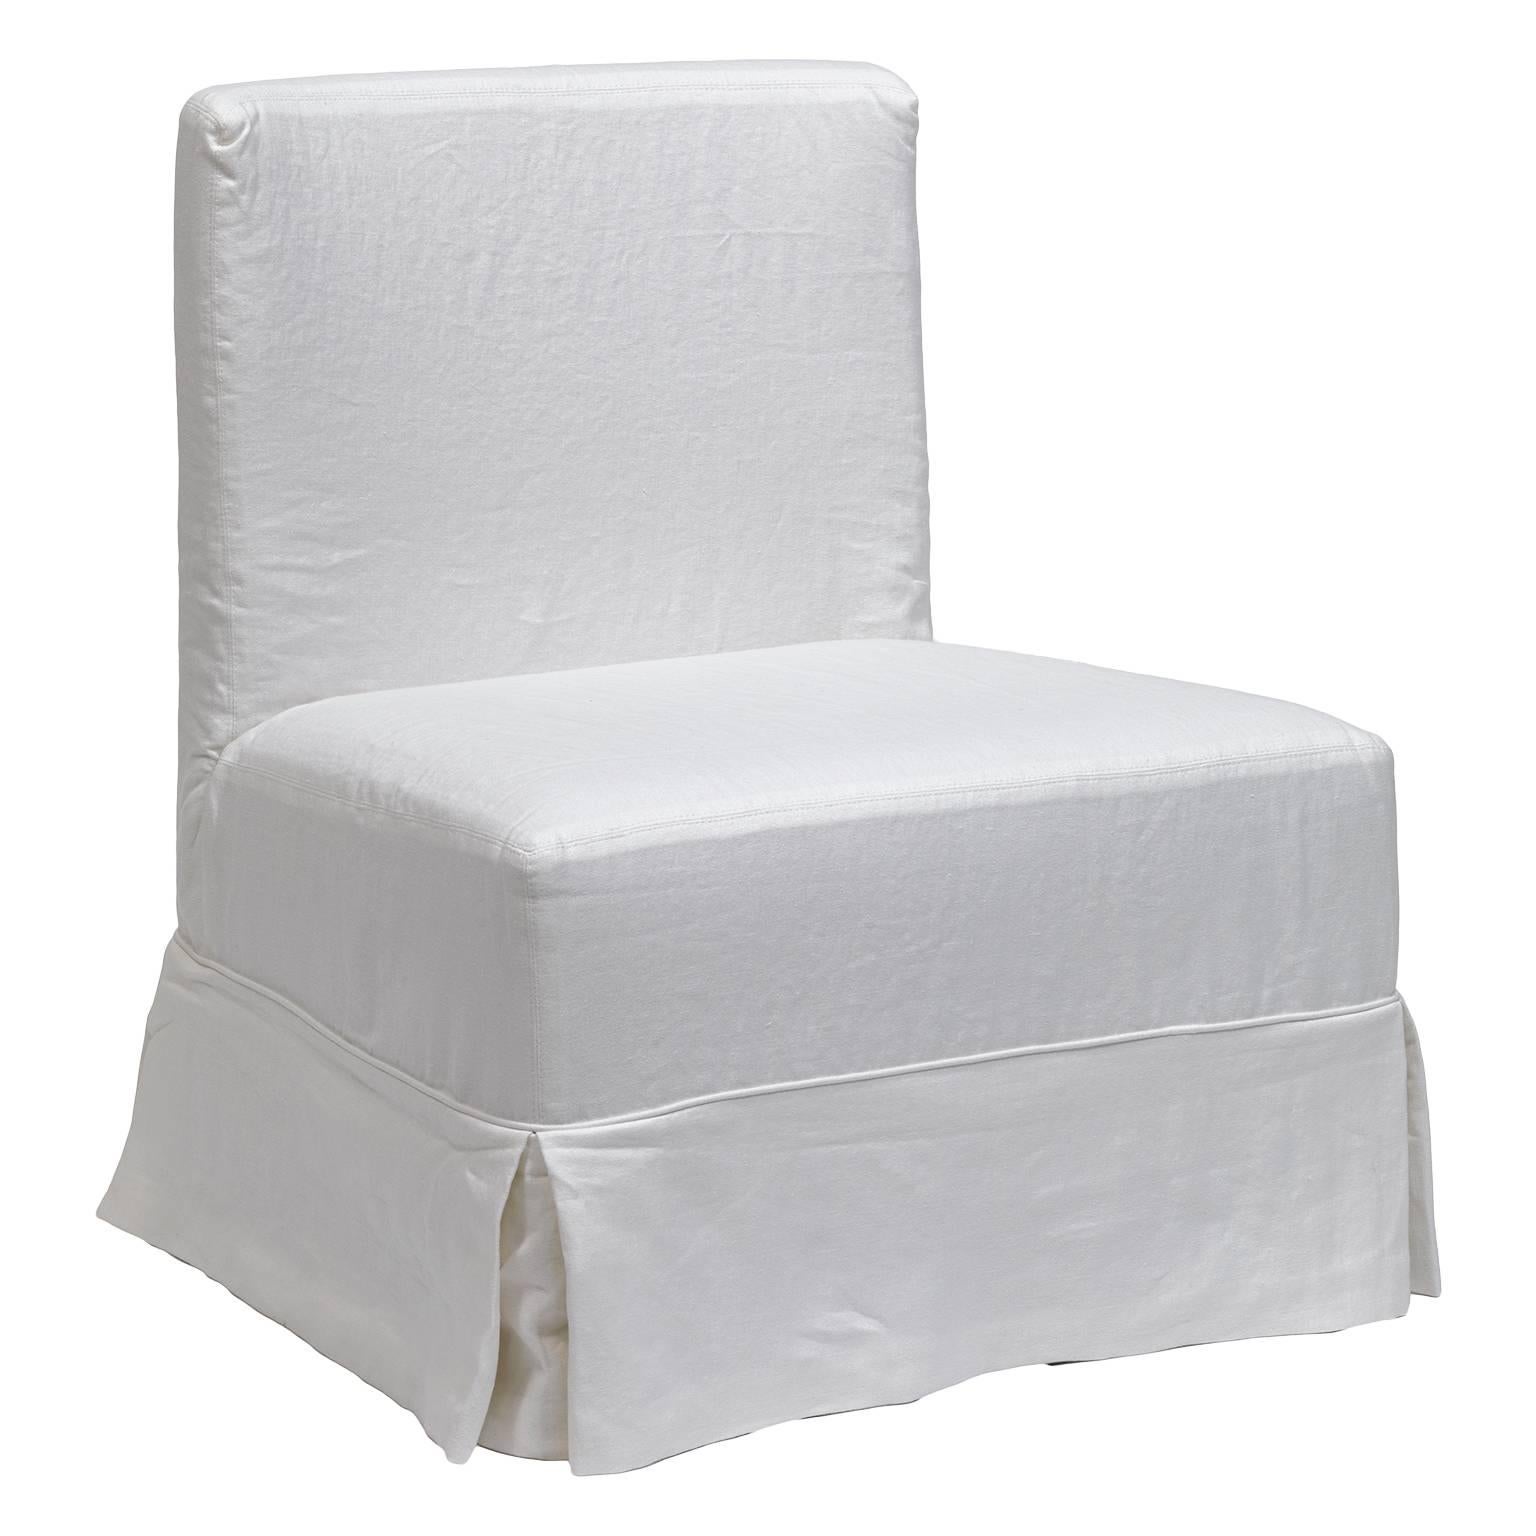 Made by am designs. High quality club handmade in Belgium, ultra-comfortable. Price including slipcover. Fabric shown Postal Optical White. Fabric needs to be ordered separately.